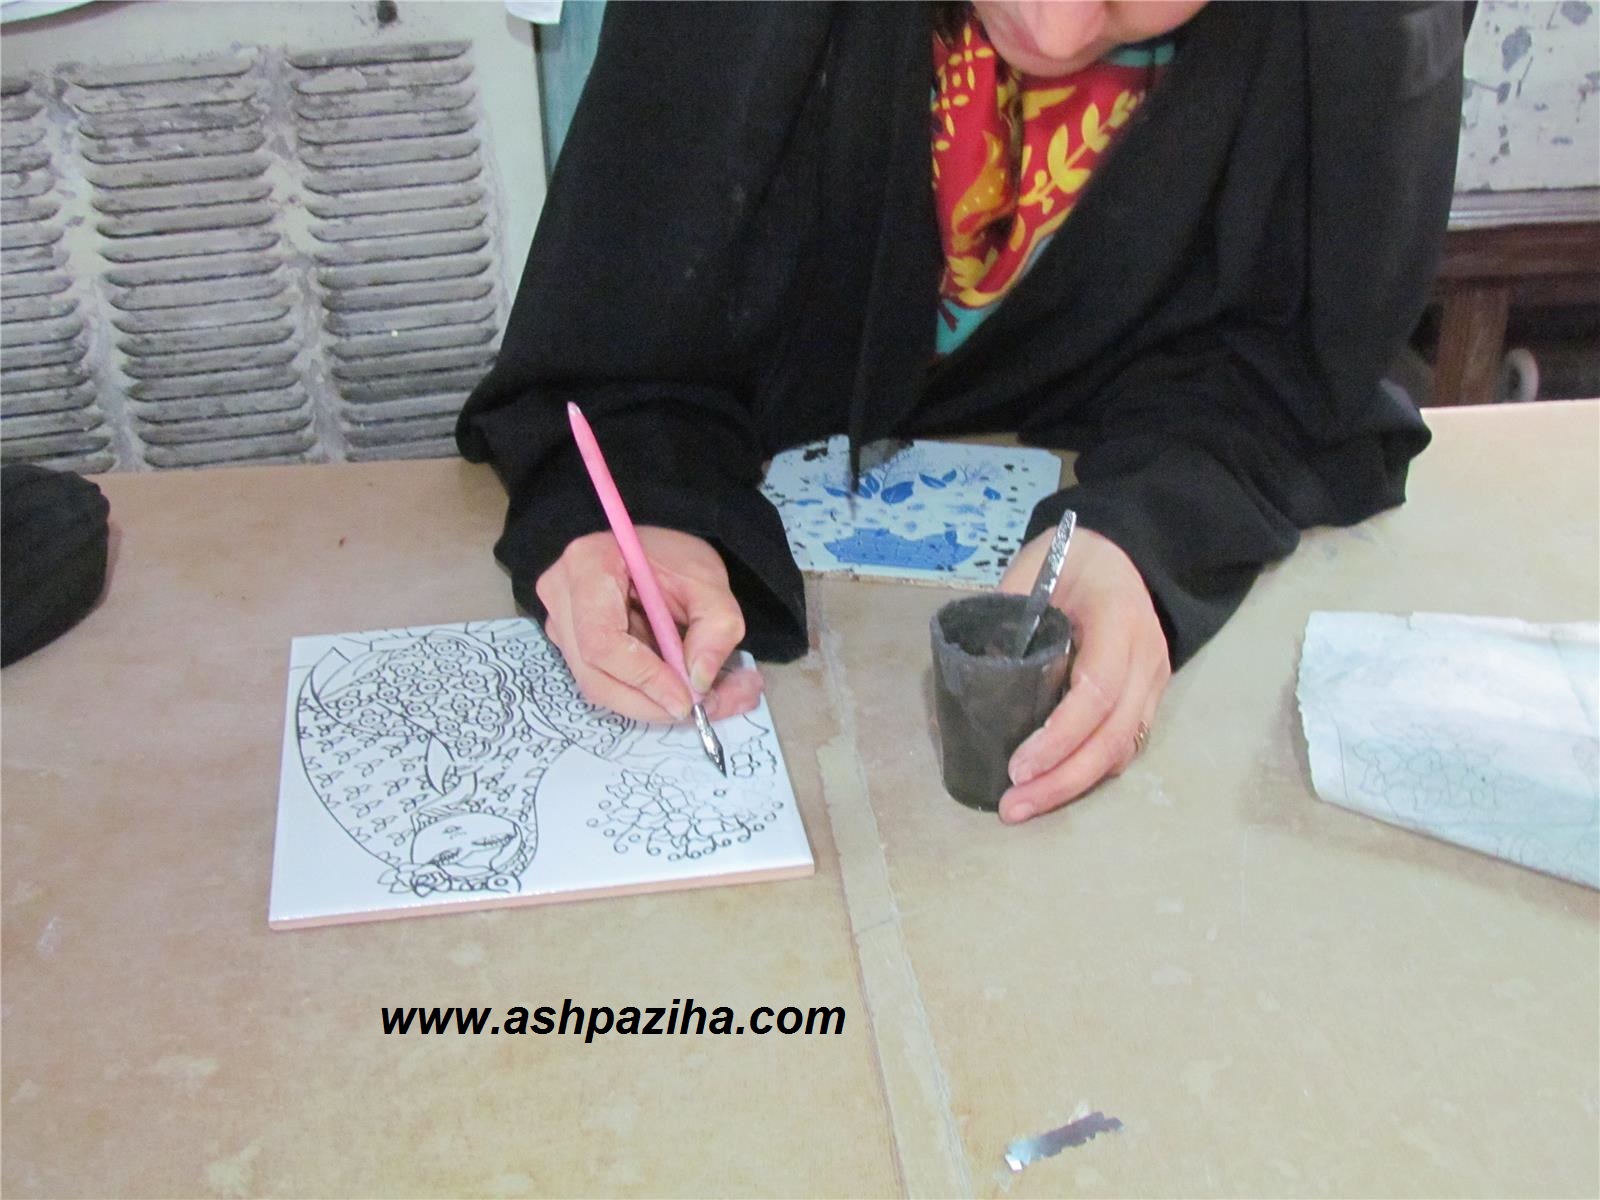 Educational - painting - and - designing - the - Tiles (11)